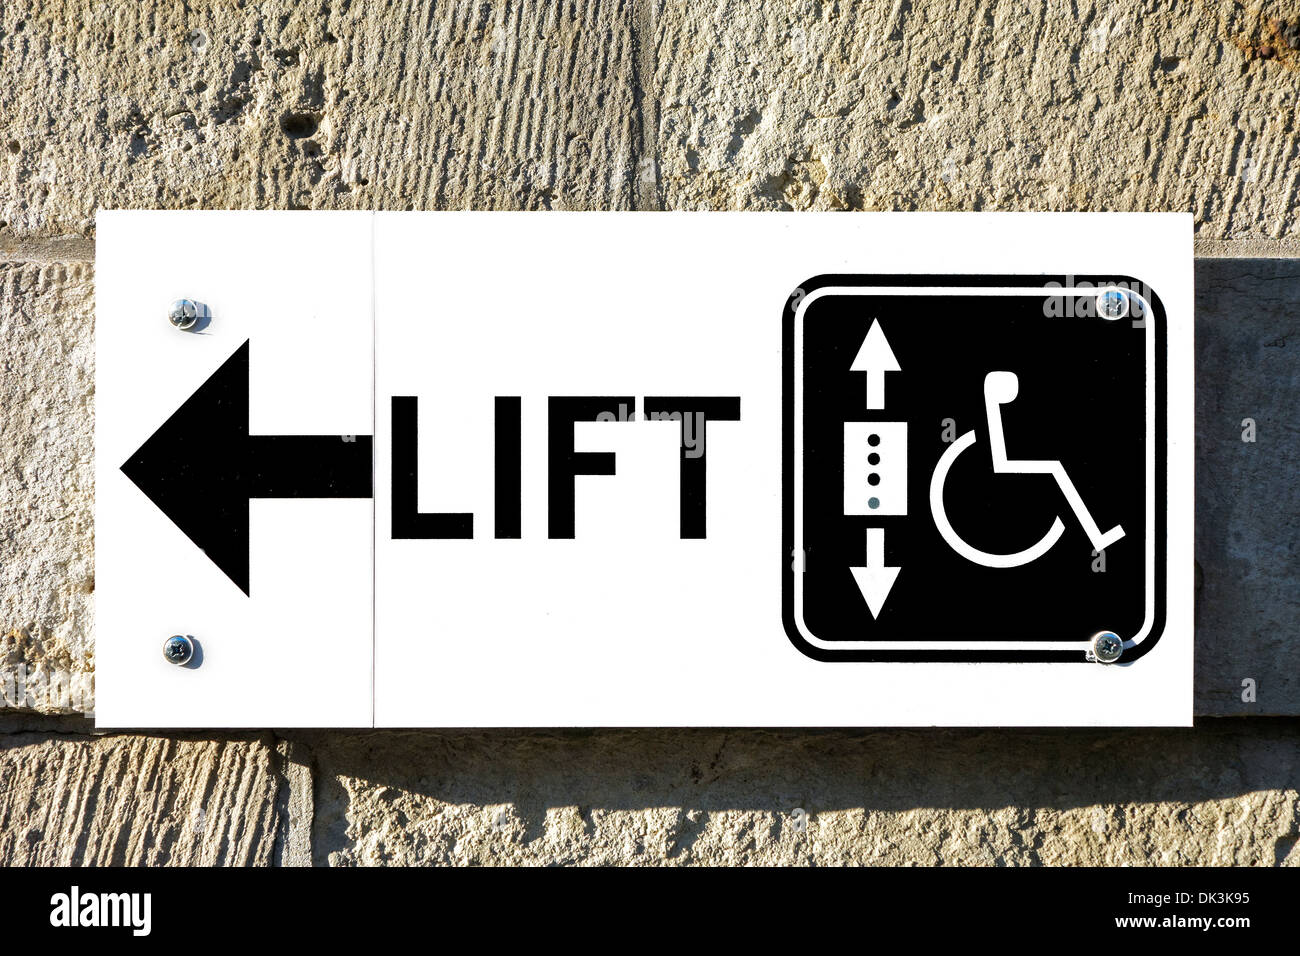 Sign with arrow showing direction to lift / elevator for wheelchair users and handicapped persons to access public building Stock Photo